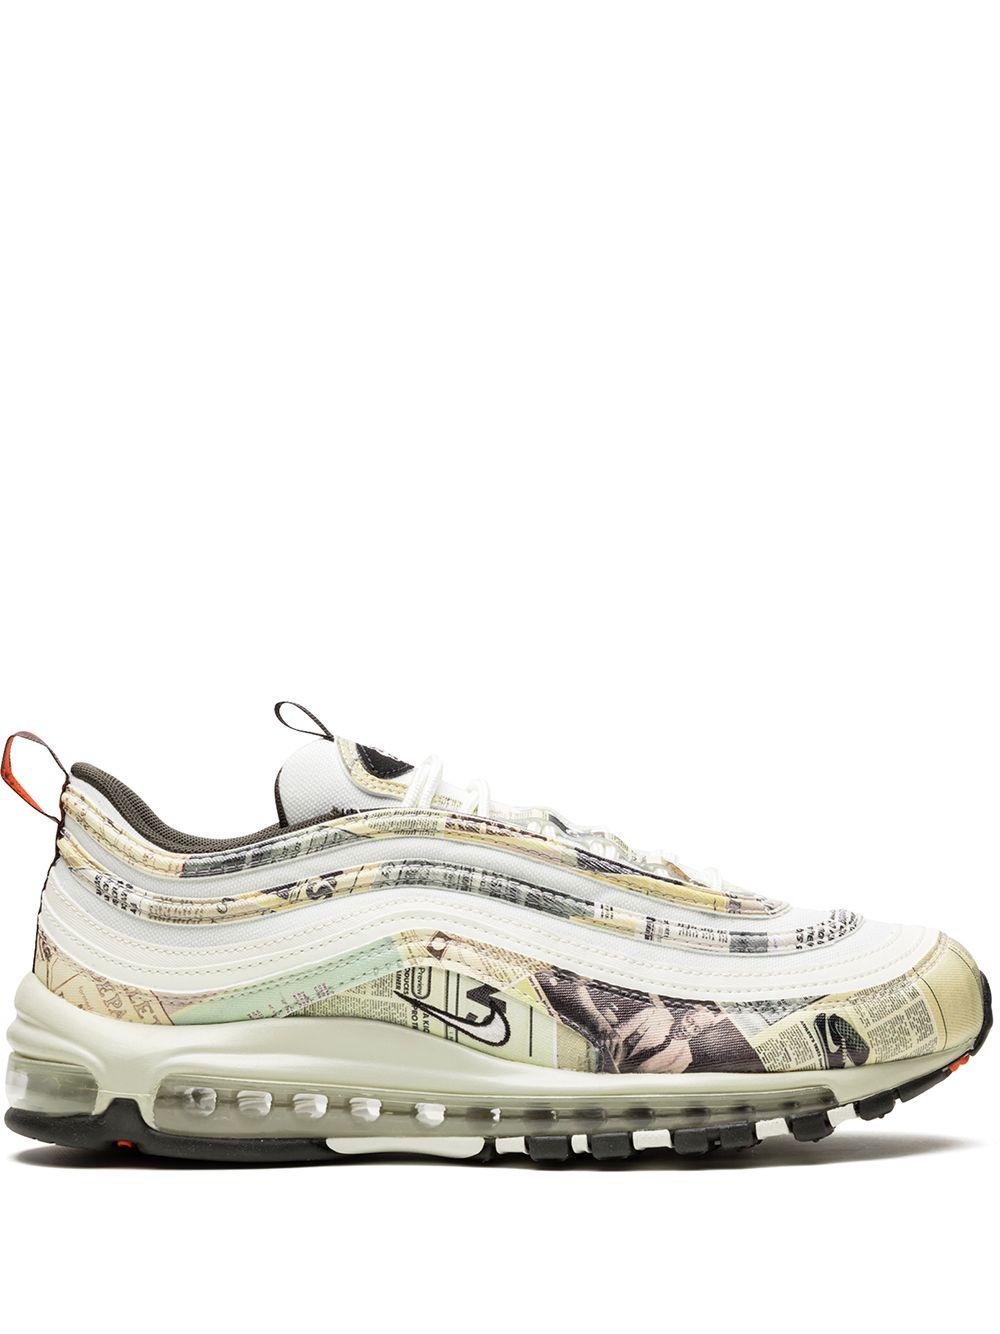 Nike Leather Air Max 97 Newspaper Sneakers in White for Men - Save 90% |  Lyst